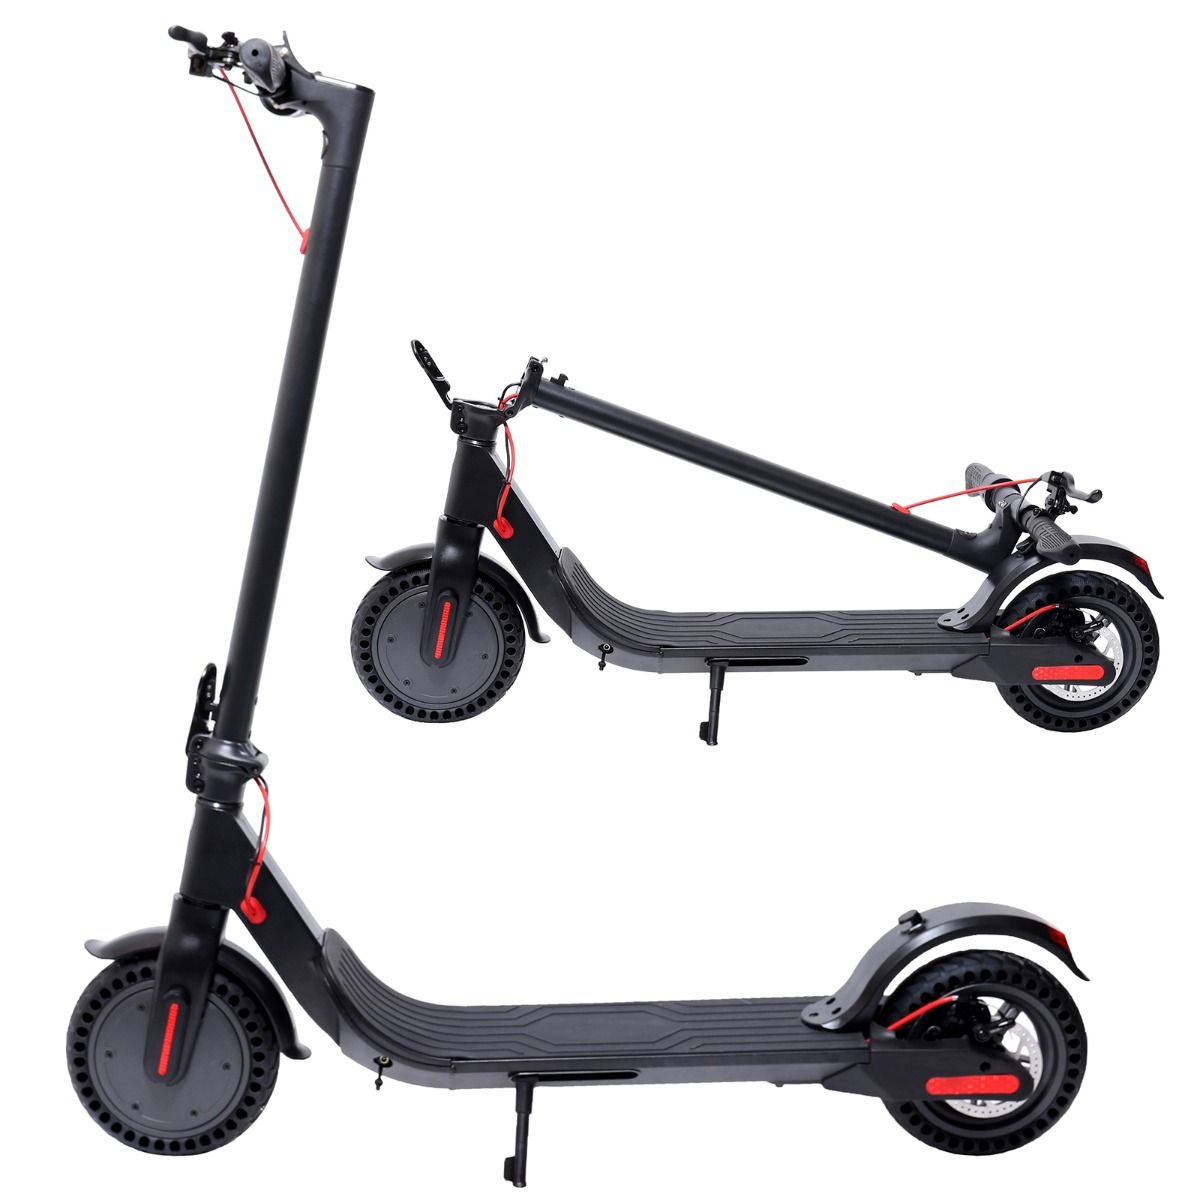 Powerful Scooter Battery /& Motor 350W Electric E-Scooter Foldable Lightweight Electric Scooter for Adults and Teenagers with Powerful Headlight